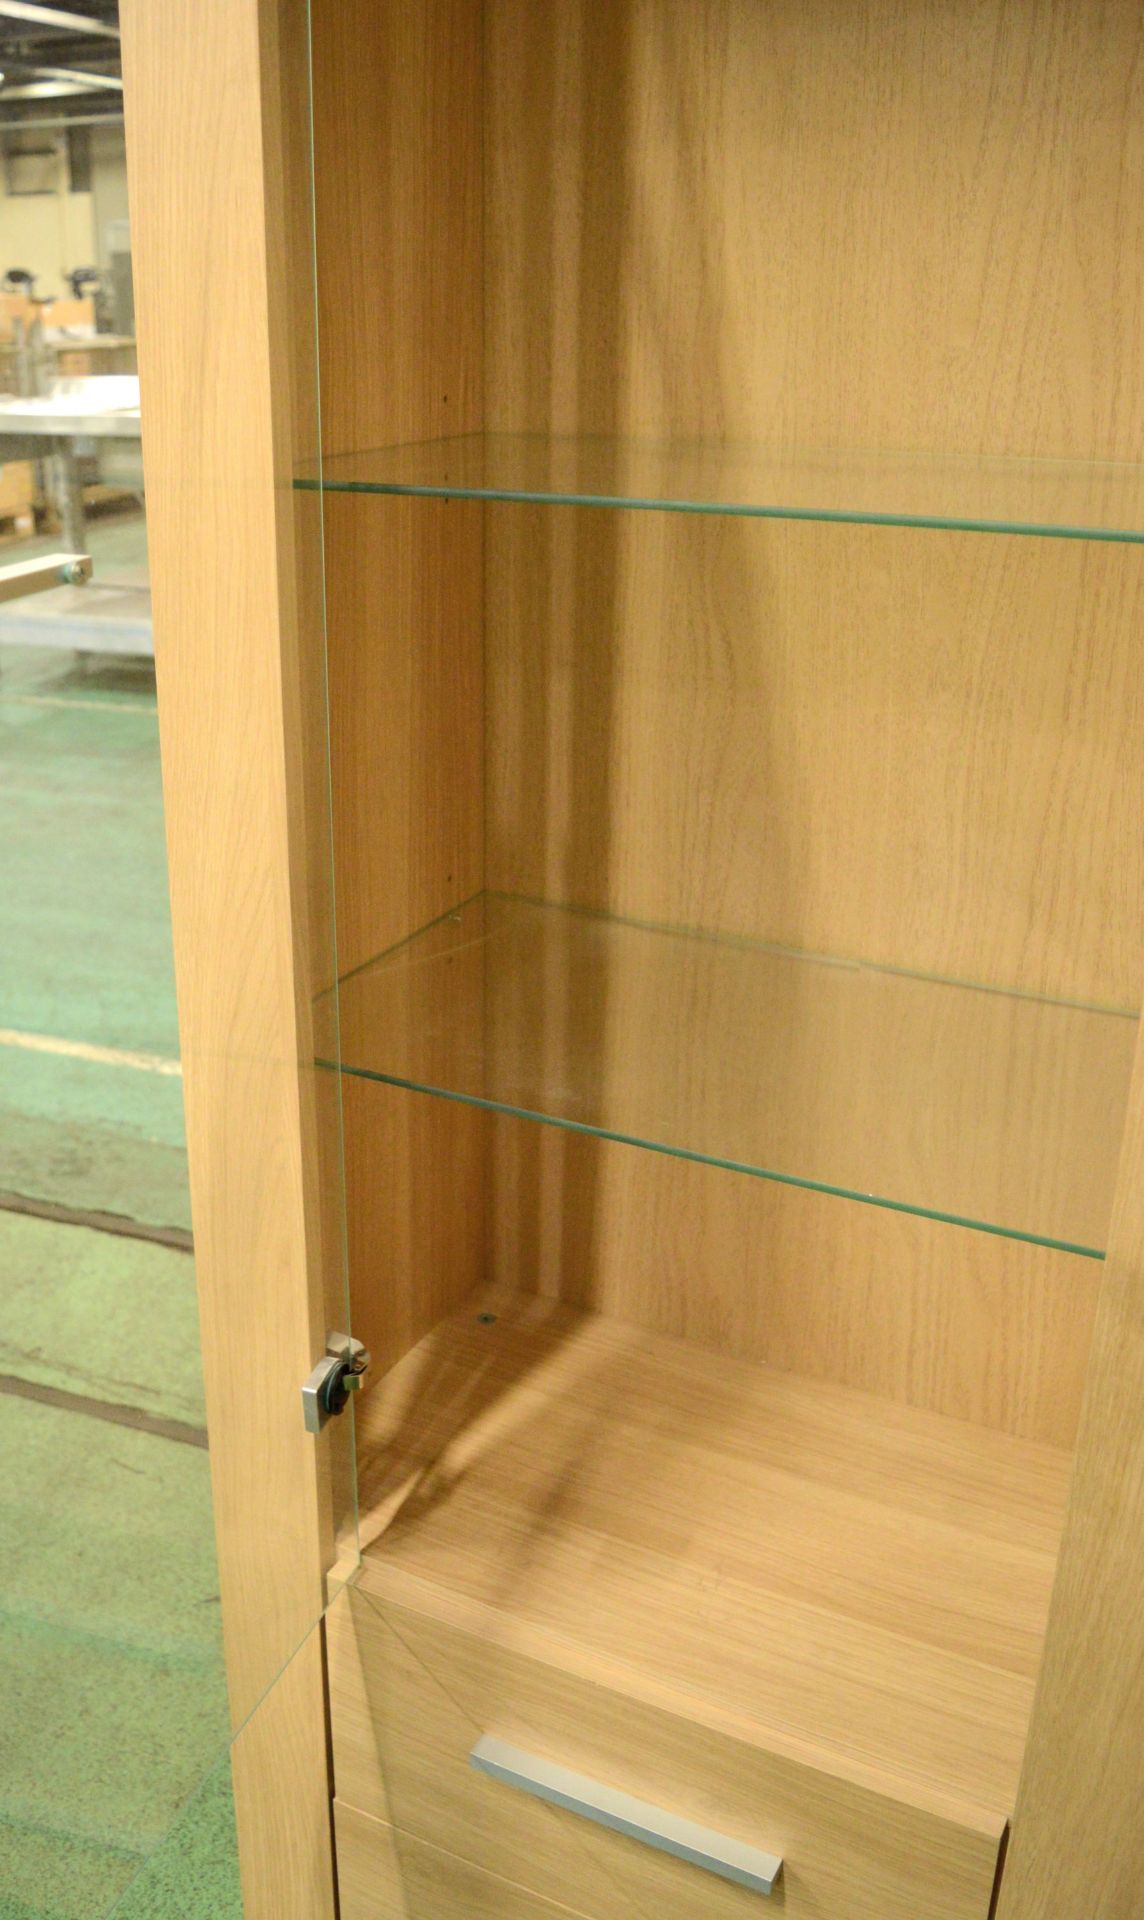 Light Oak Effect Display Cabinet with Glass Shelves W580 x D340 x H1810mm. - Image 2 of 3